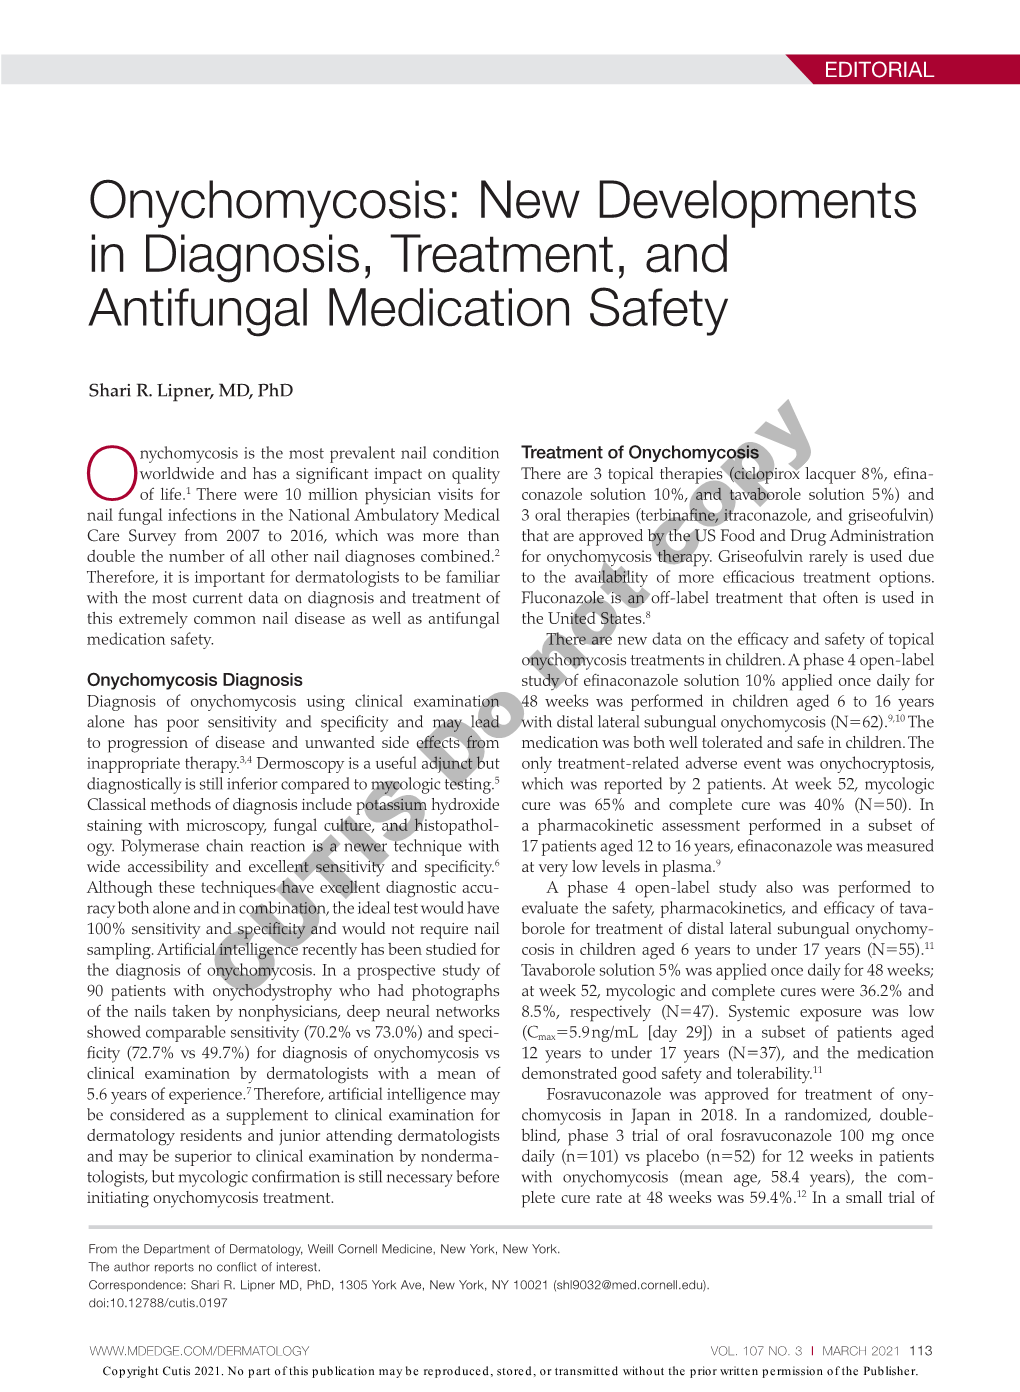 Onychomycosis: New Developments in Diagnosis, Treatment, and Antifungal Medication Safety